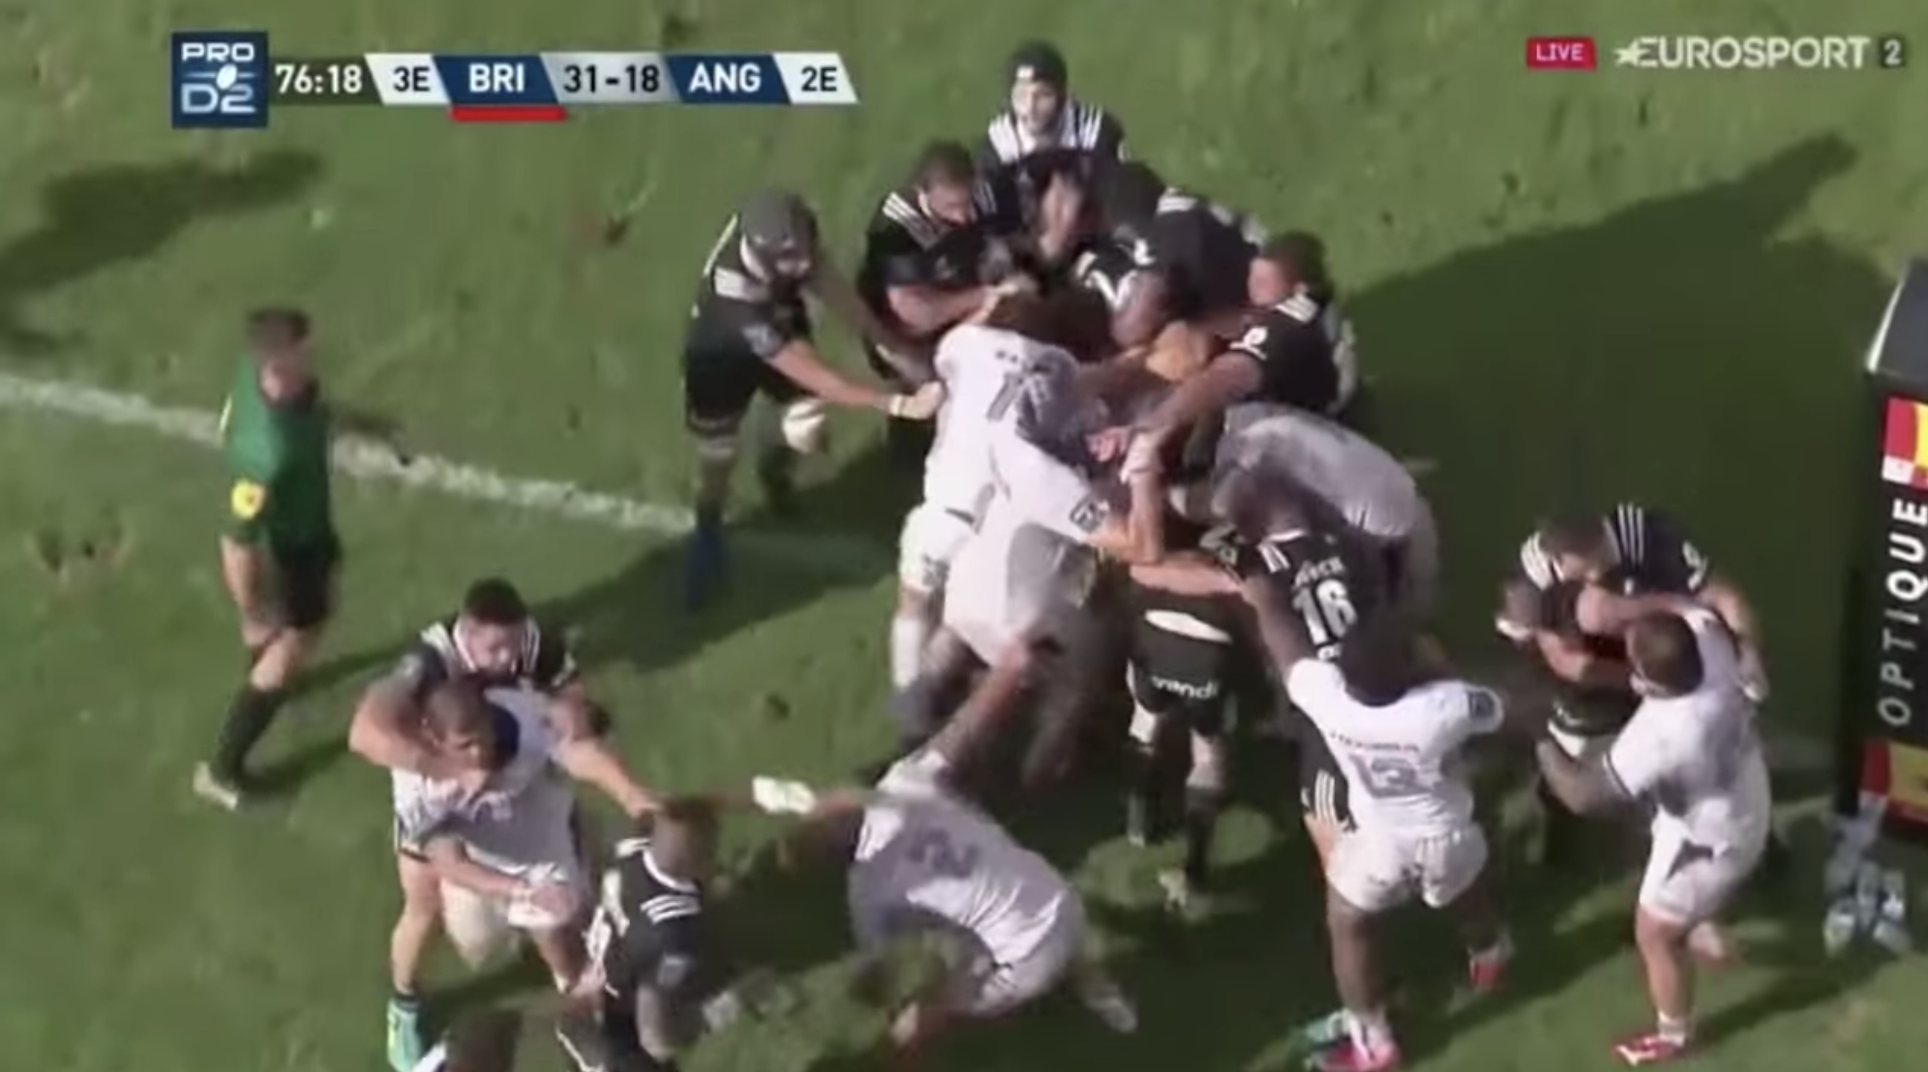 WATCH: ANOTHER 20-man brawl breaks out in the French second league